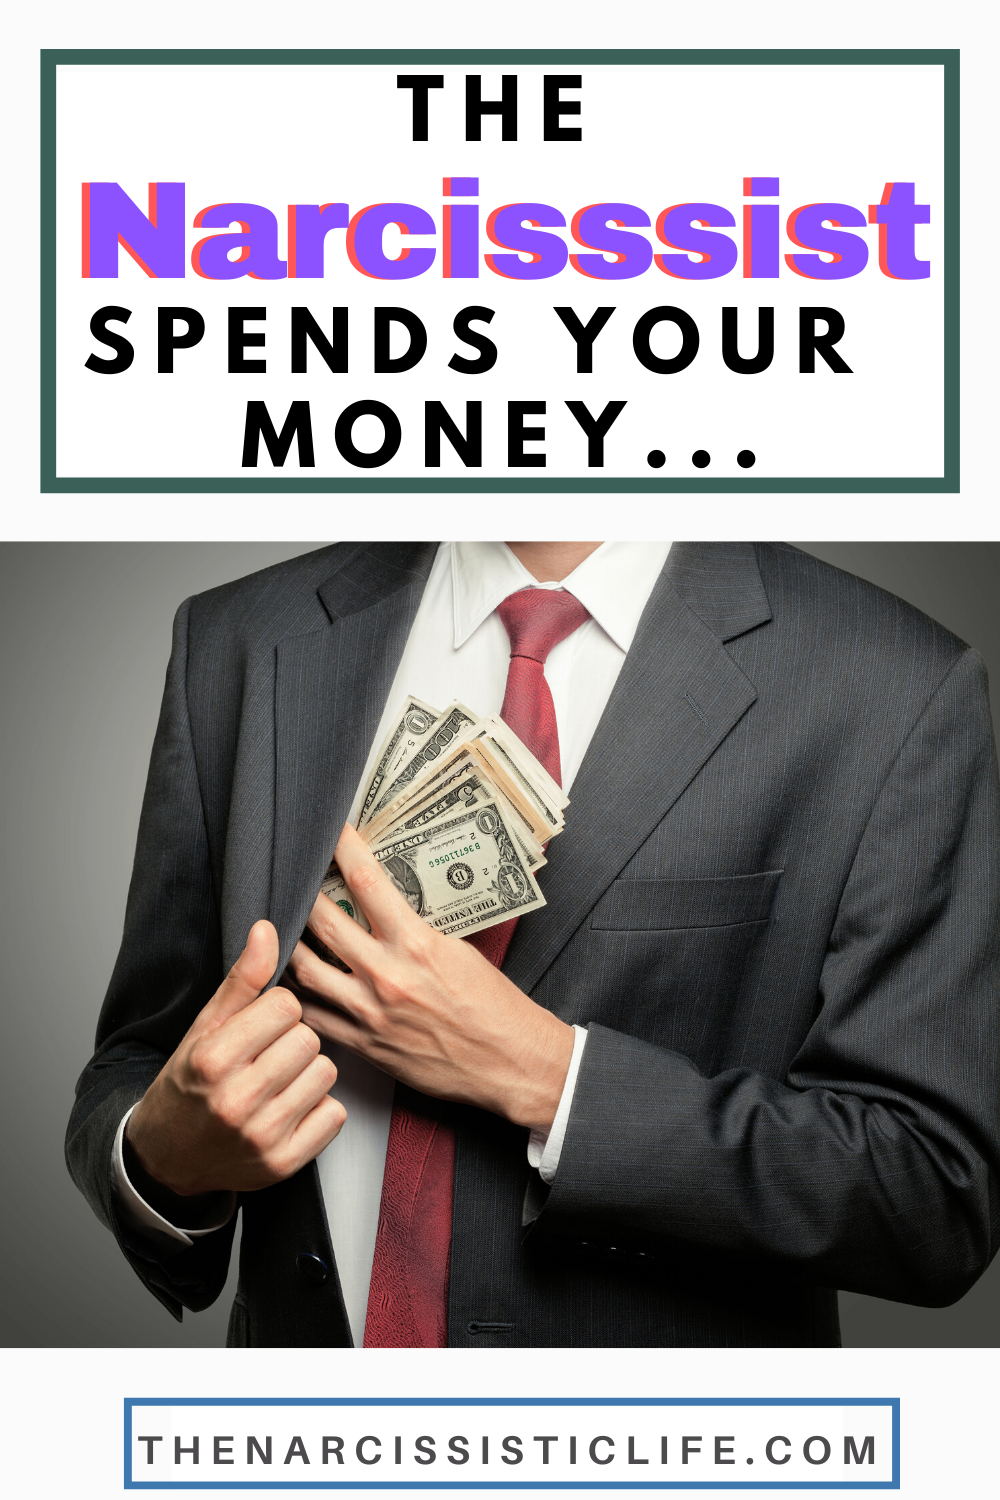 Why Does The Narcissist Spend Your Money?